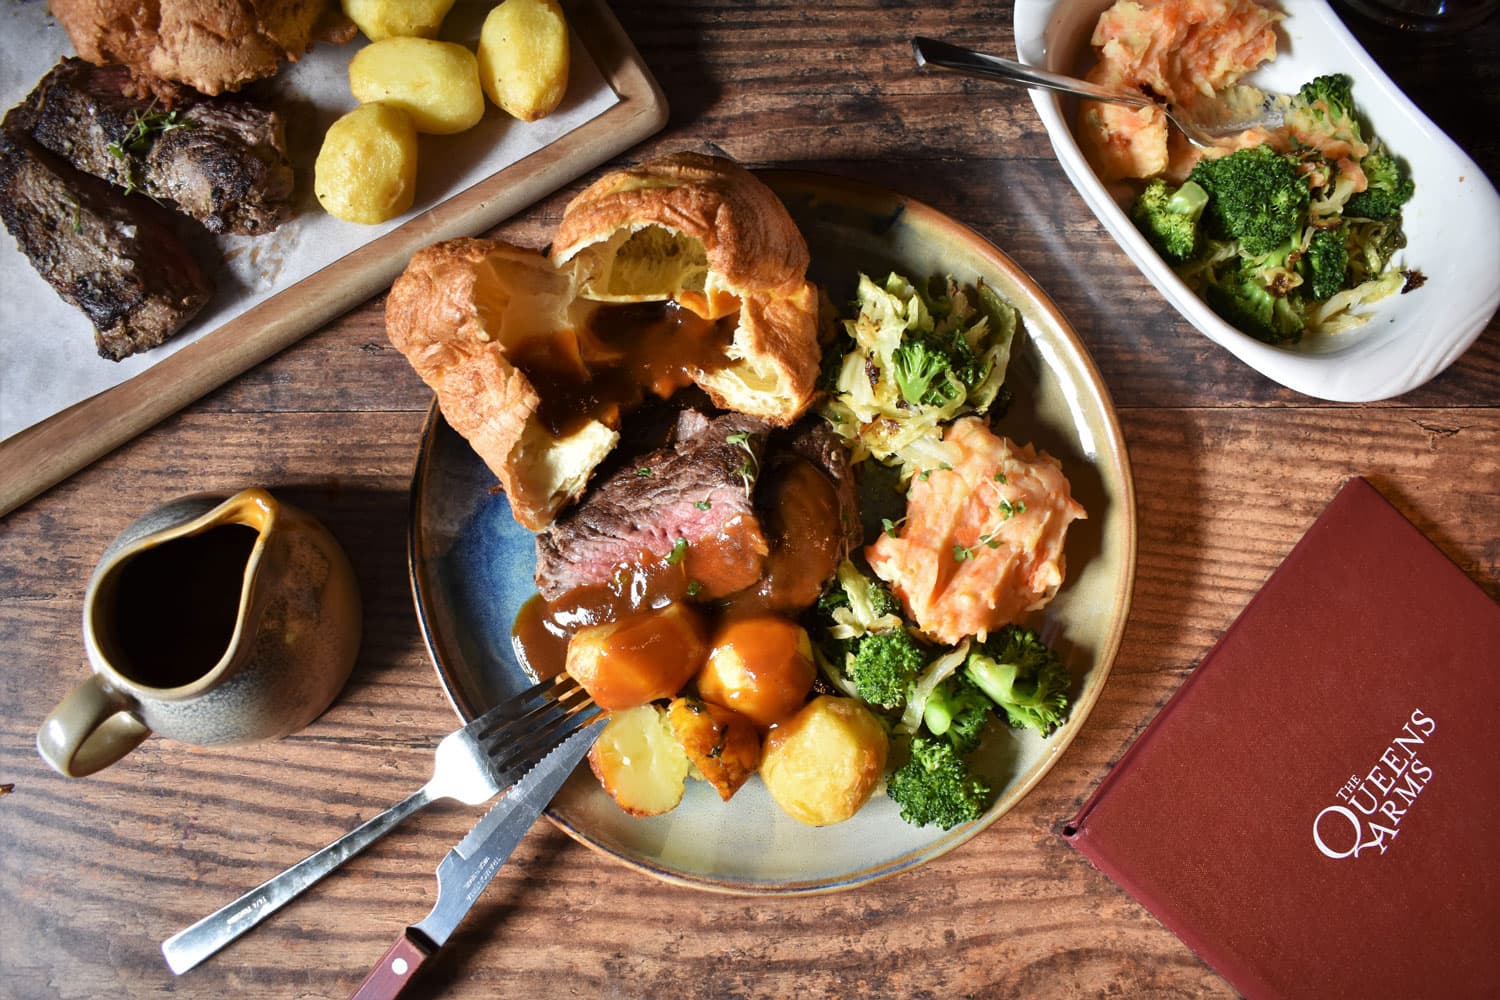 Sunday Roasts at the Queens Arms